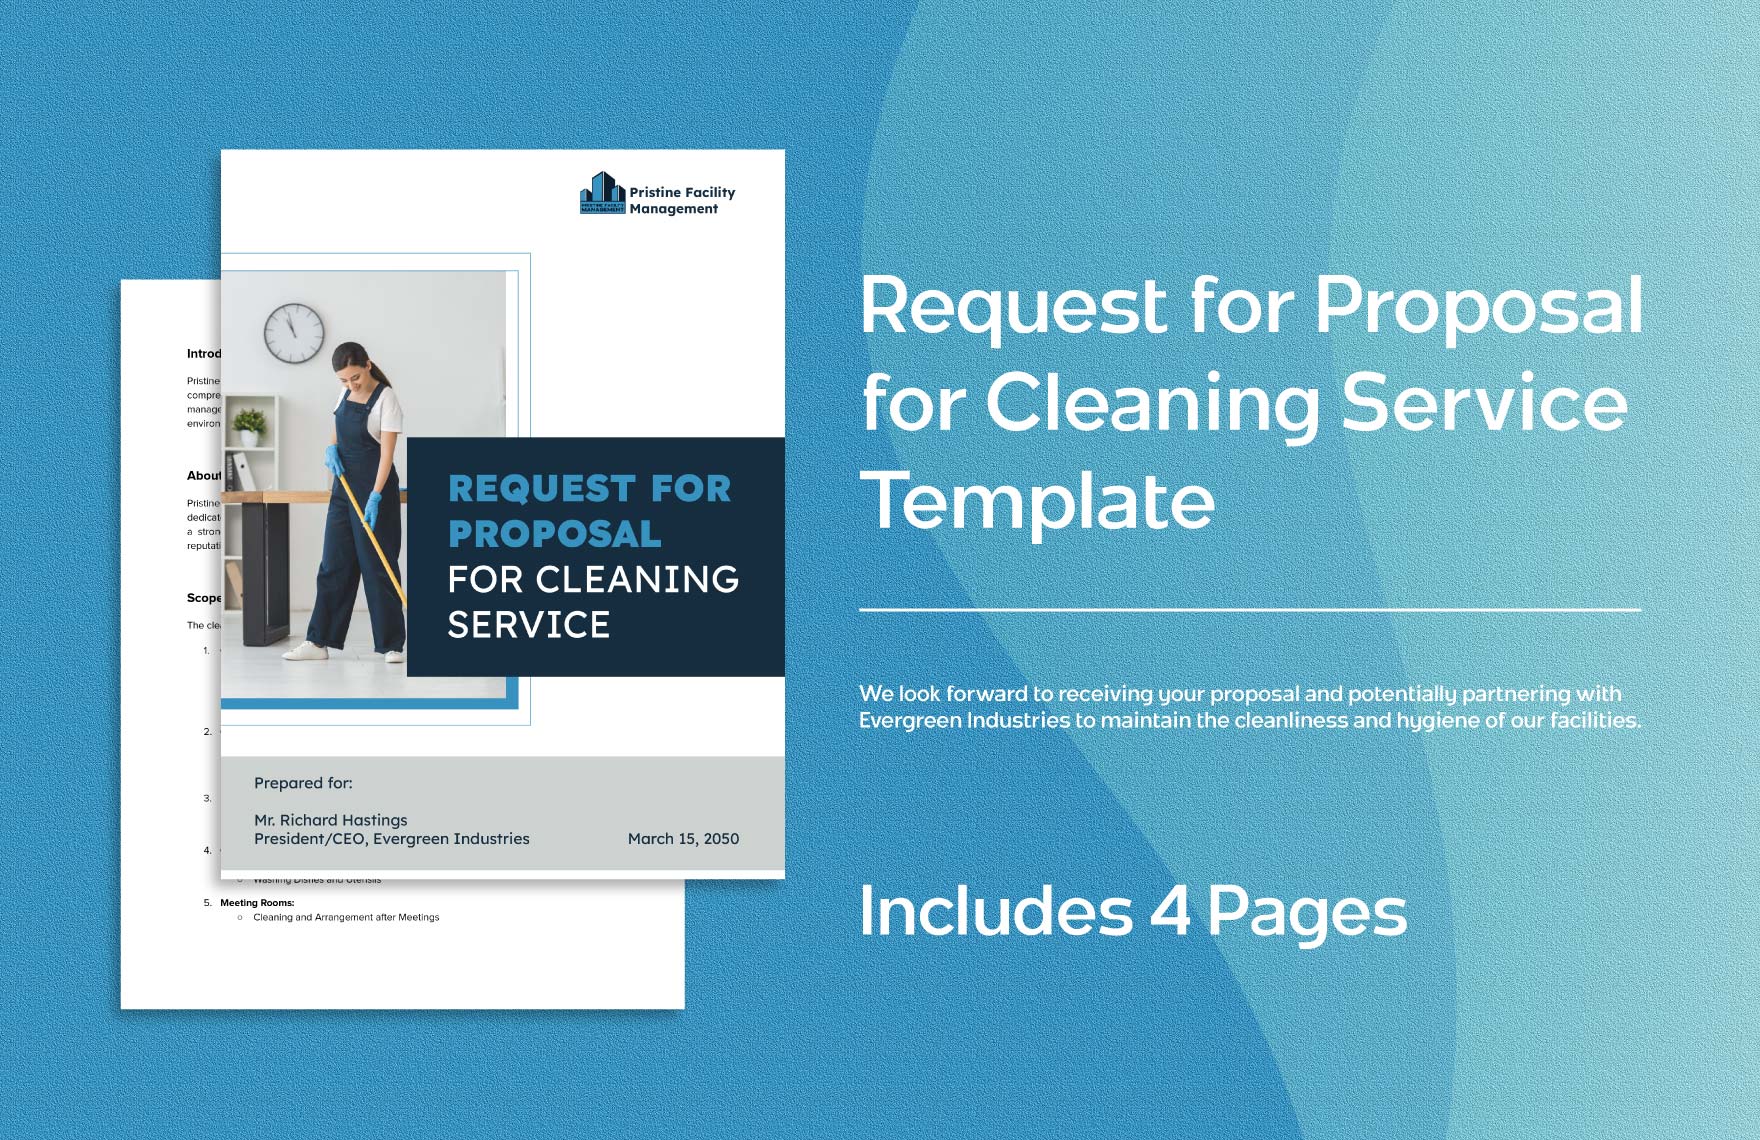 Request for Proposal for Cleaning Service Template